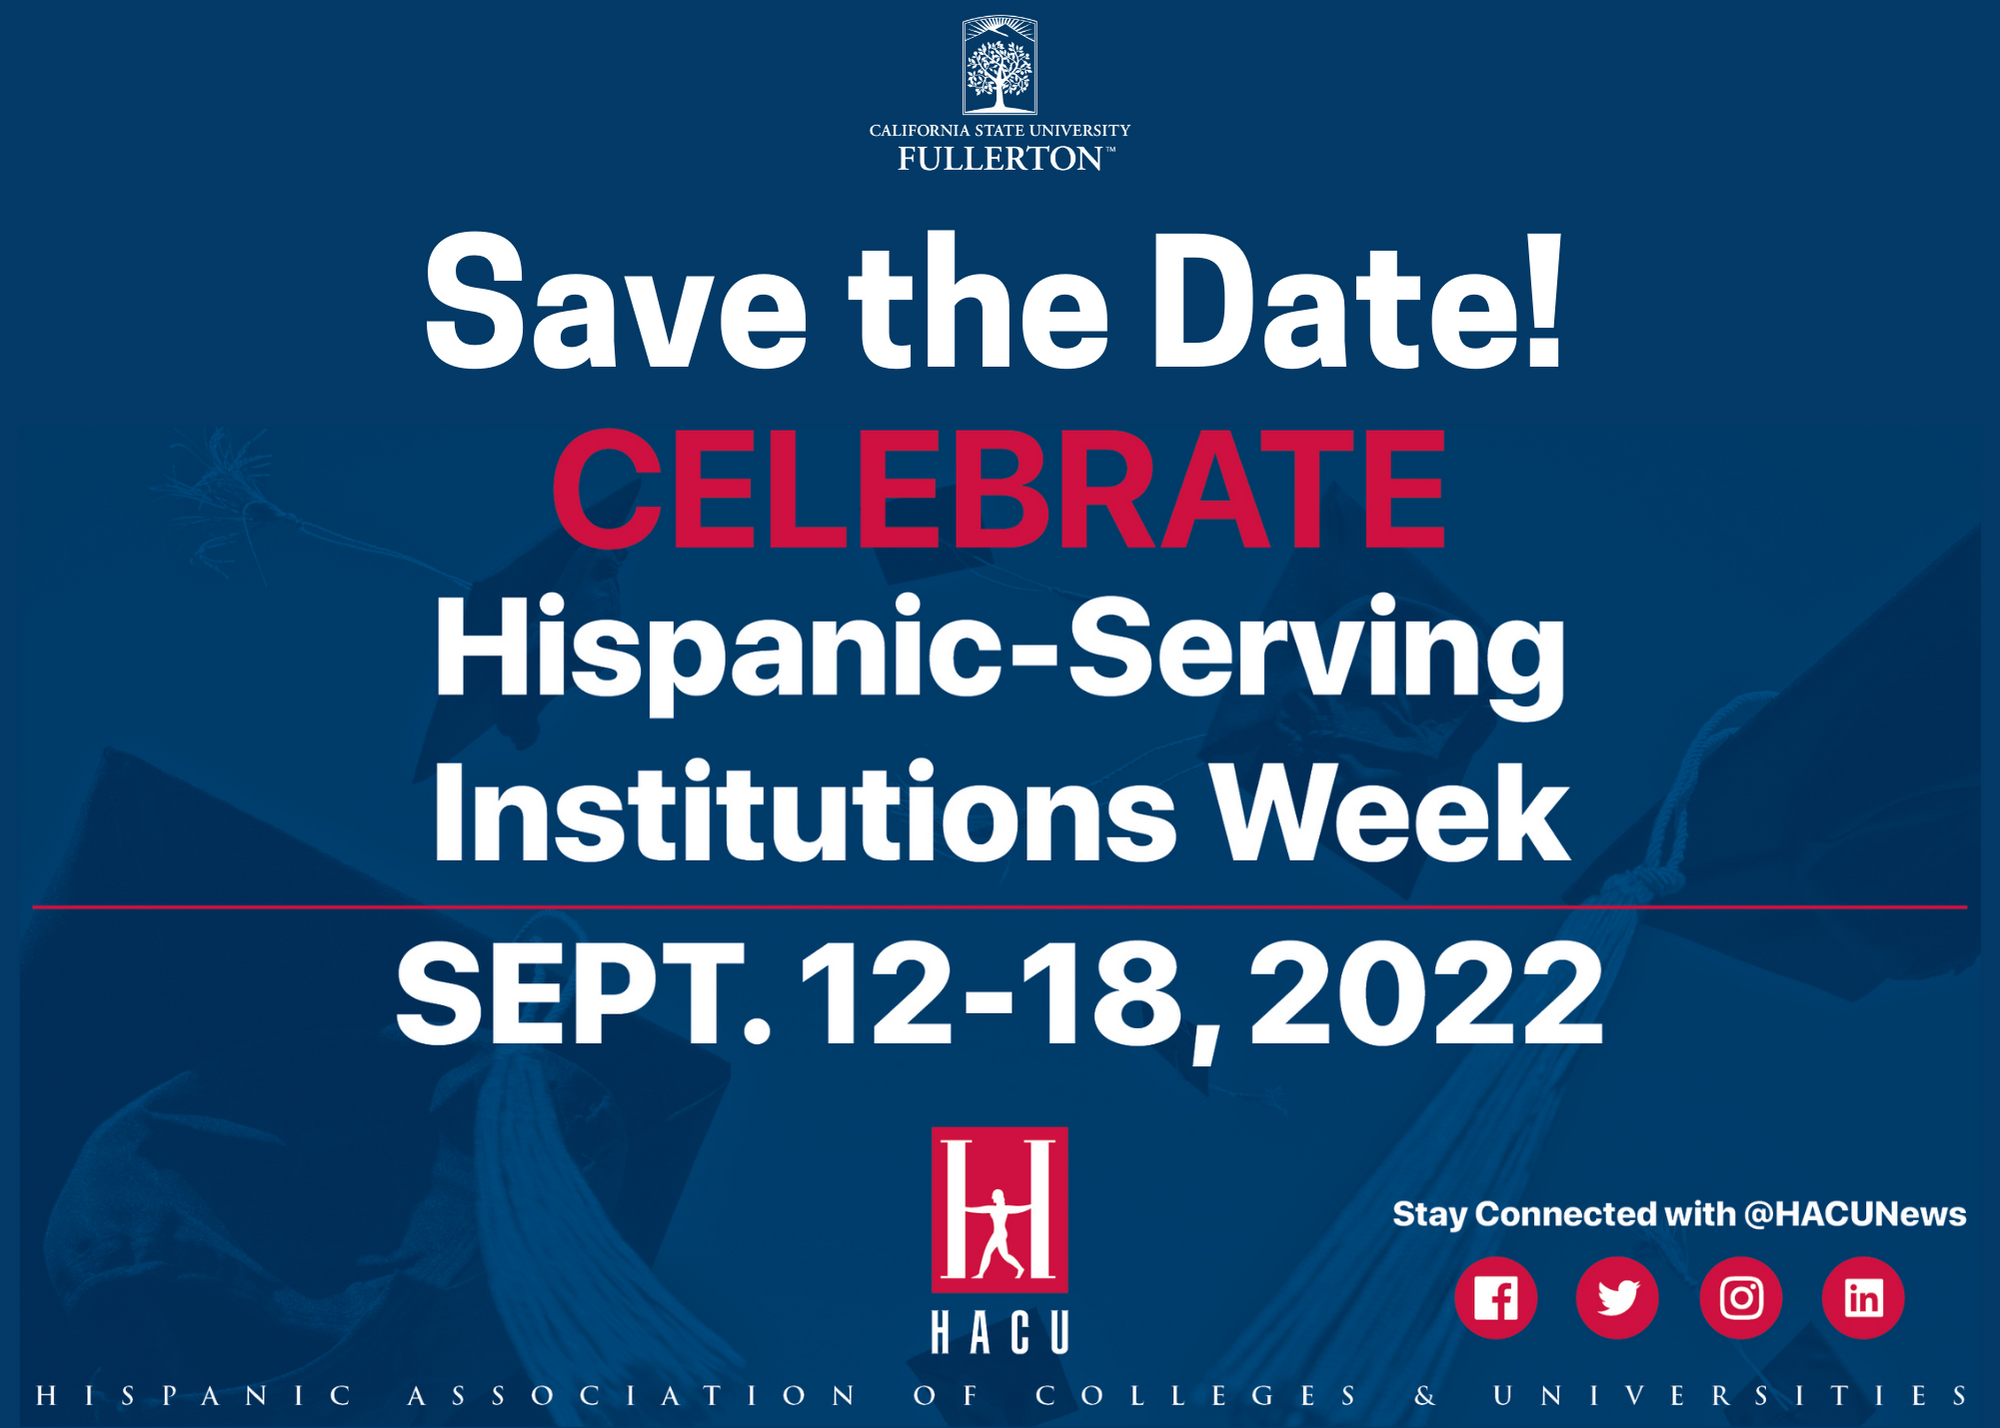 HSI week save the date, Sept. 12-18th 